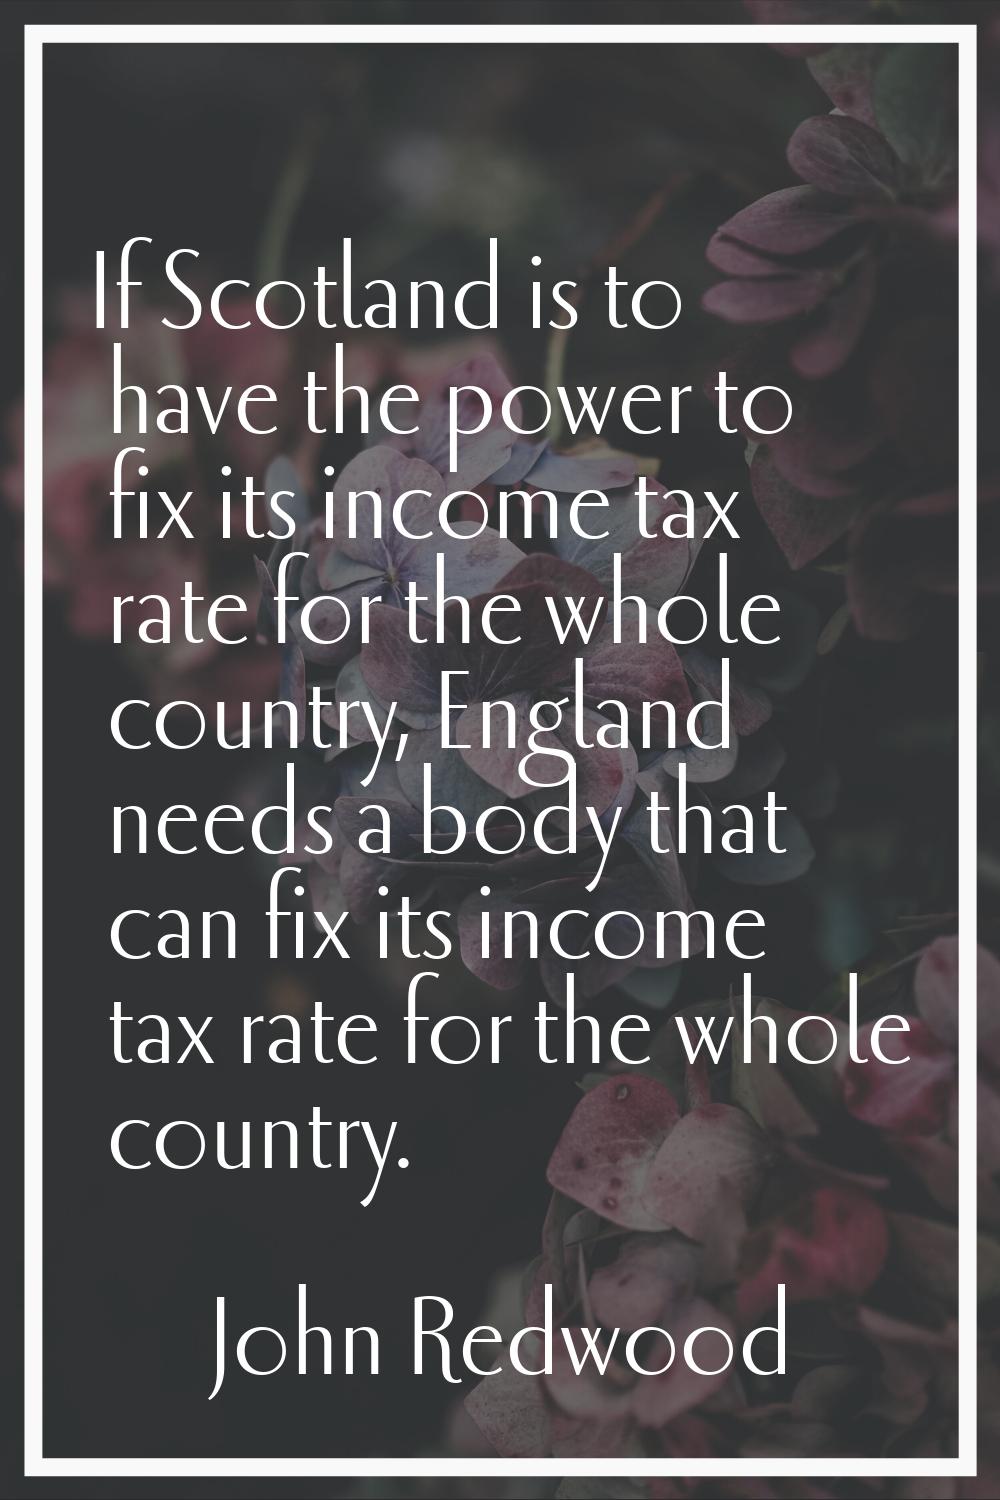 If Scotland is to have the power to fix its income tax rate for the whole country, England needs a 